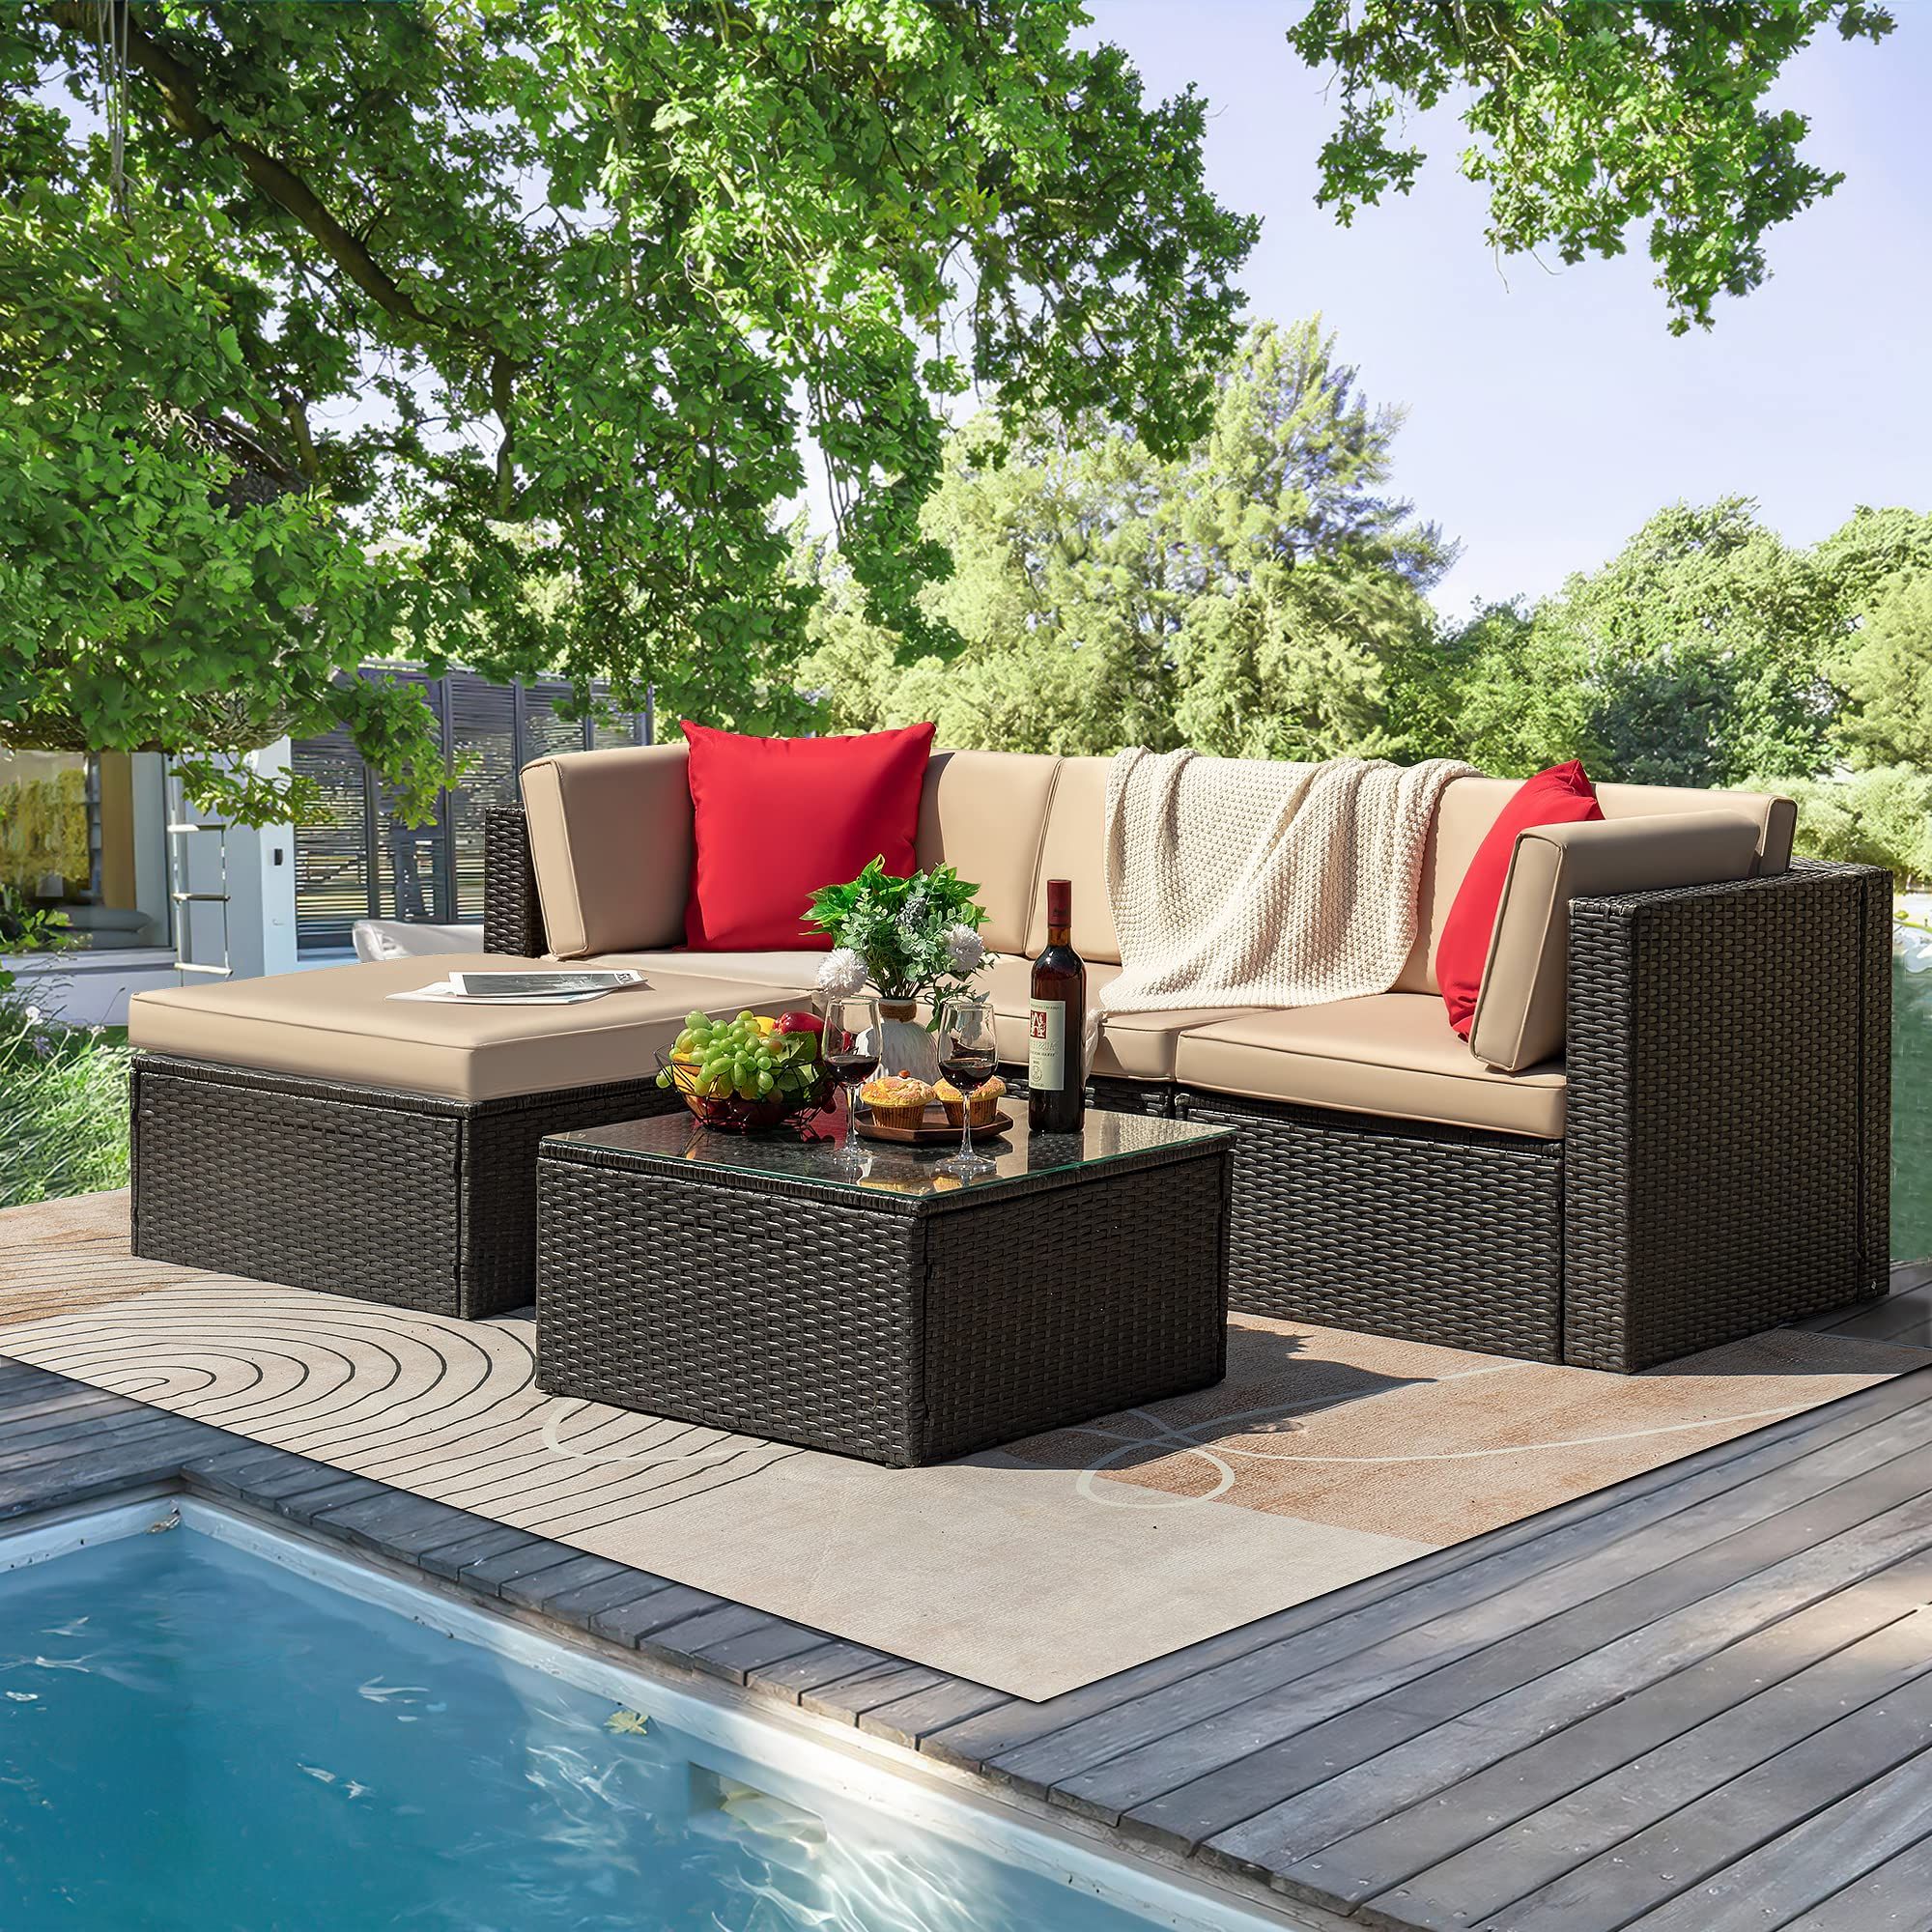 Patio Rattan Wicker Furniture With Regard To 2018 Amazon: Tuoze 5 Pieces Patio Furniture Sectional Outdoor Pe Rattan  Wicker Lawn Conversation Cushioned Garden Sofa Set With Glass Coffee Table  (beige) : Patio, Lawn & Garden (View 2 of 15)